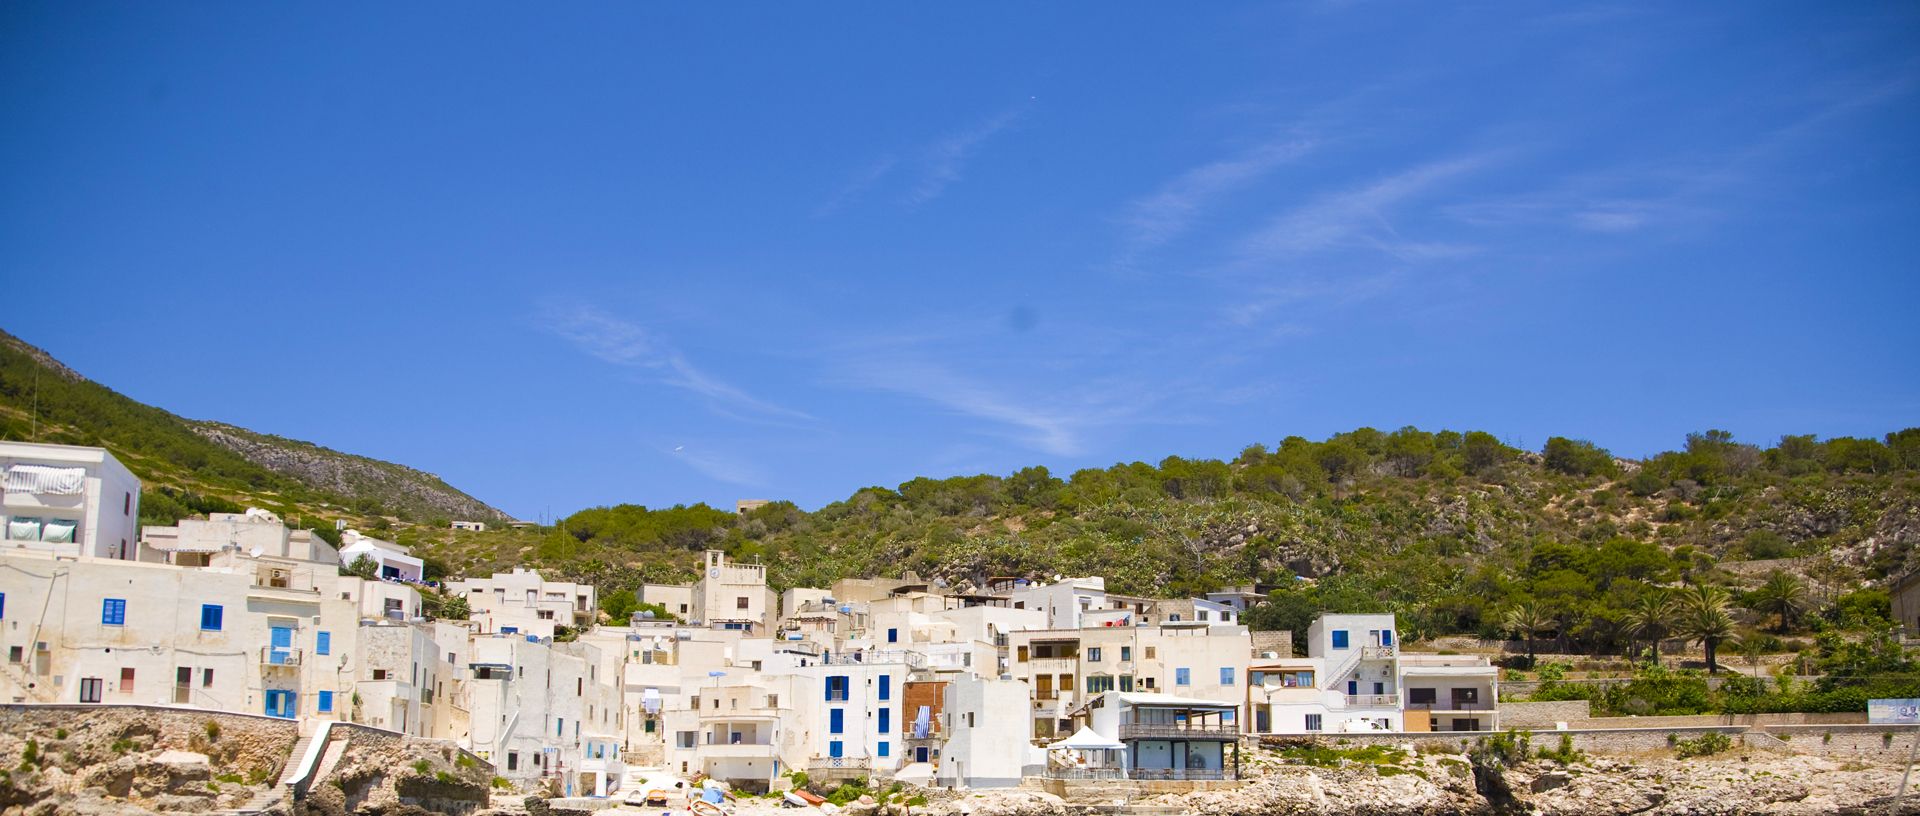 Lisola Residence a Levanzo